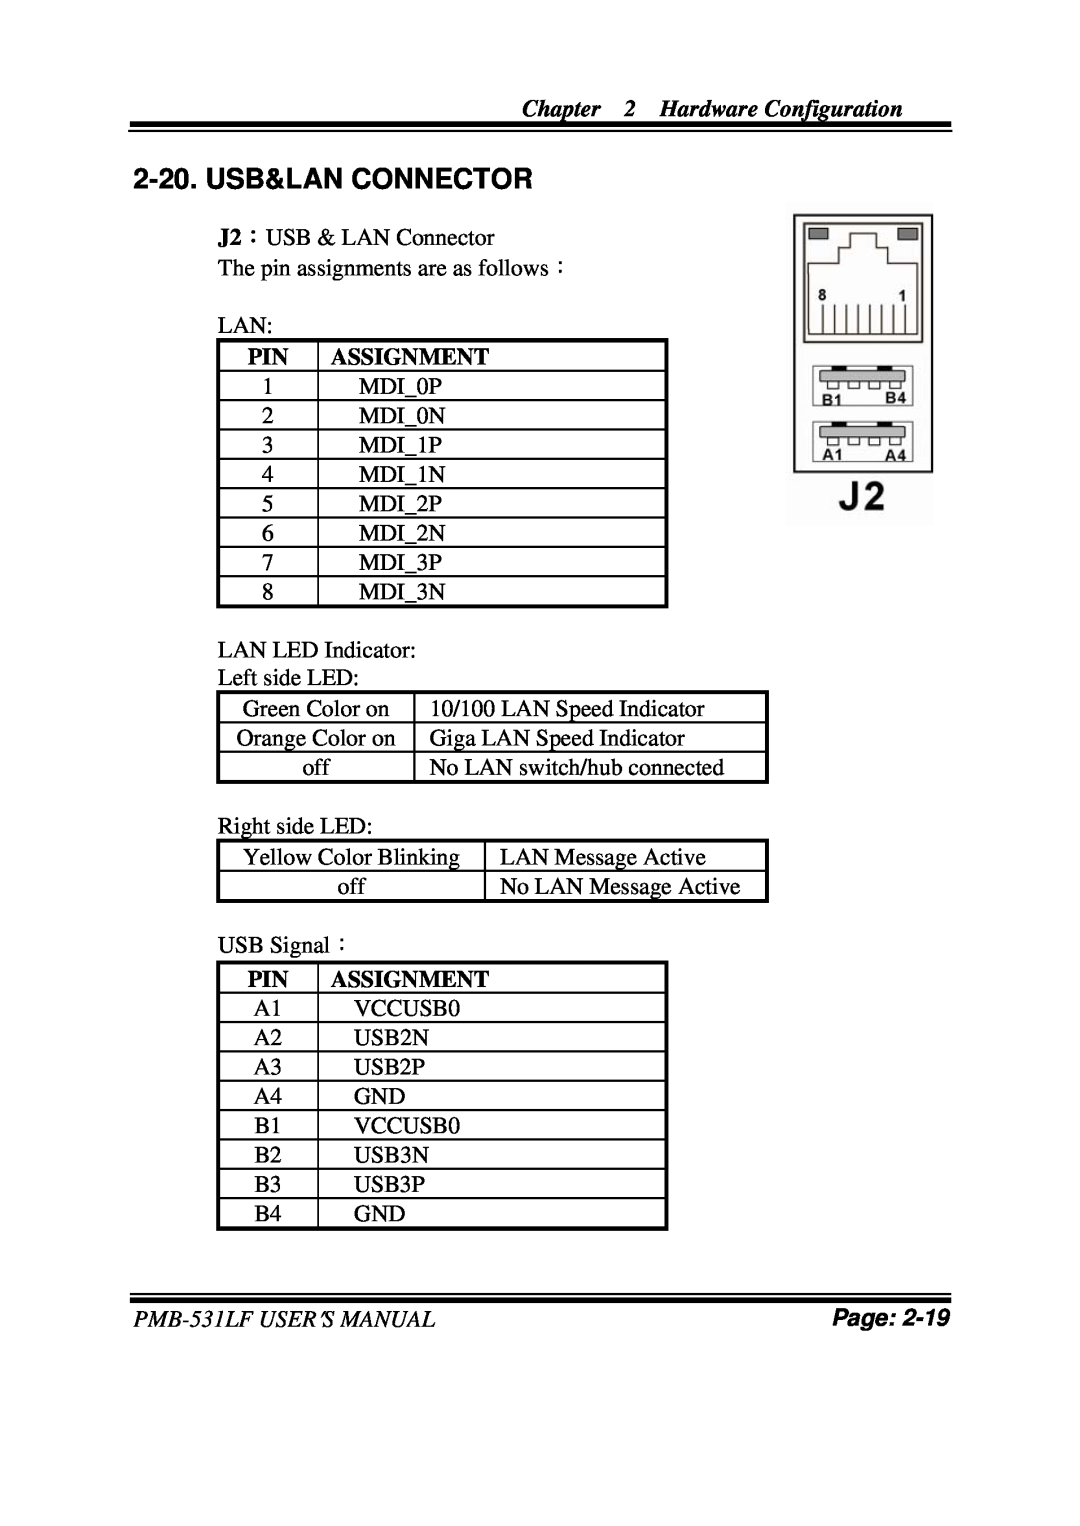 Intel user manual 2-20.USB&LAN CONNECTOR, Hardware Configuration, Assignment, PMB-531LFUSER′S MANUAL, Page 